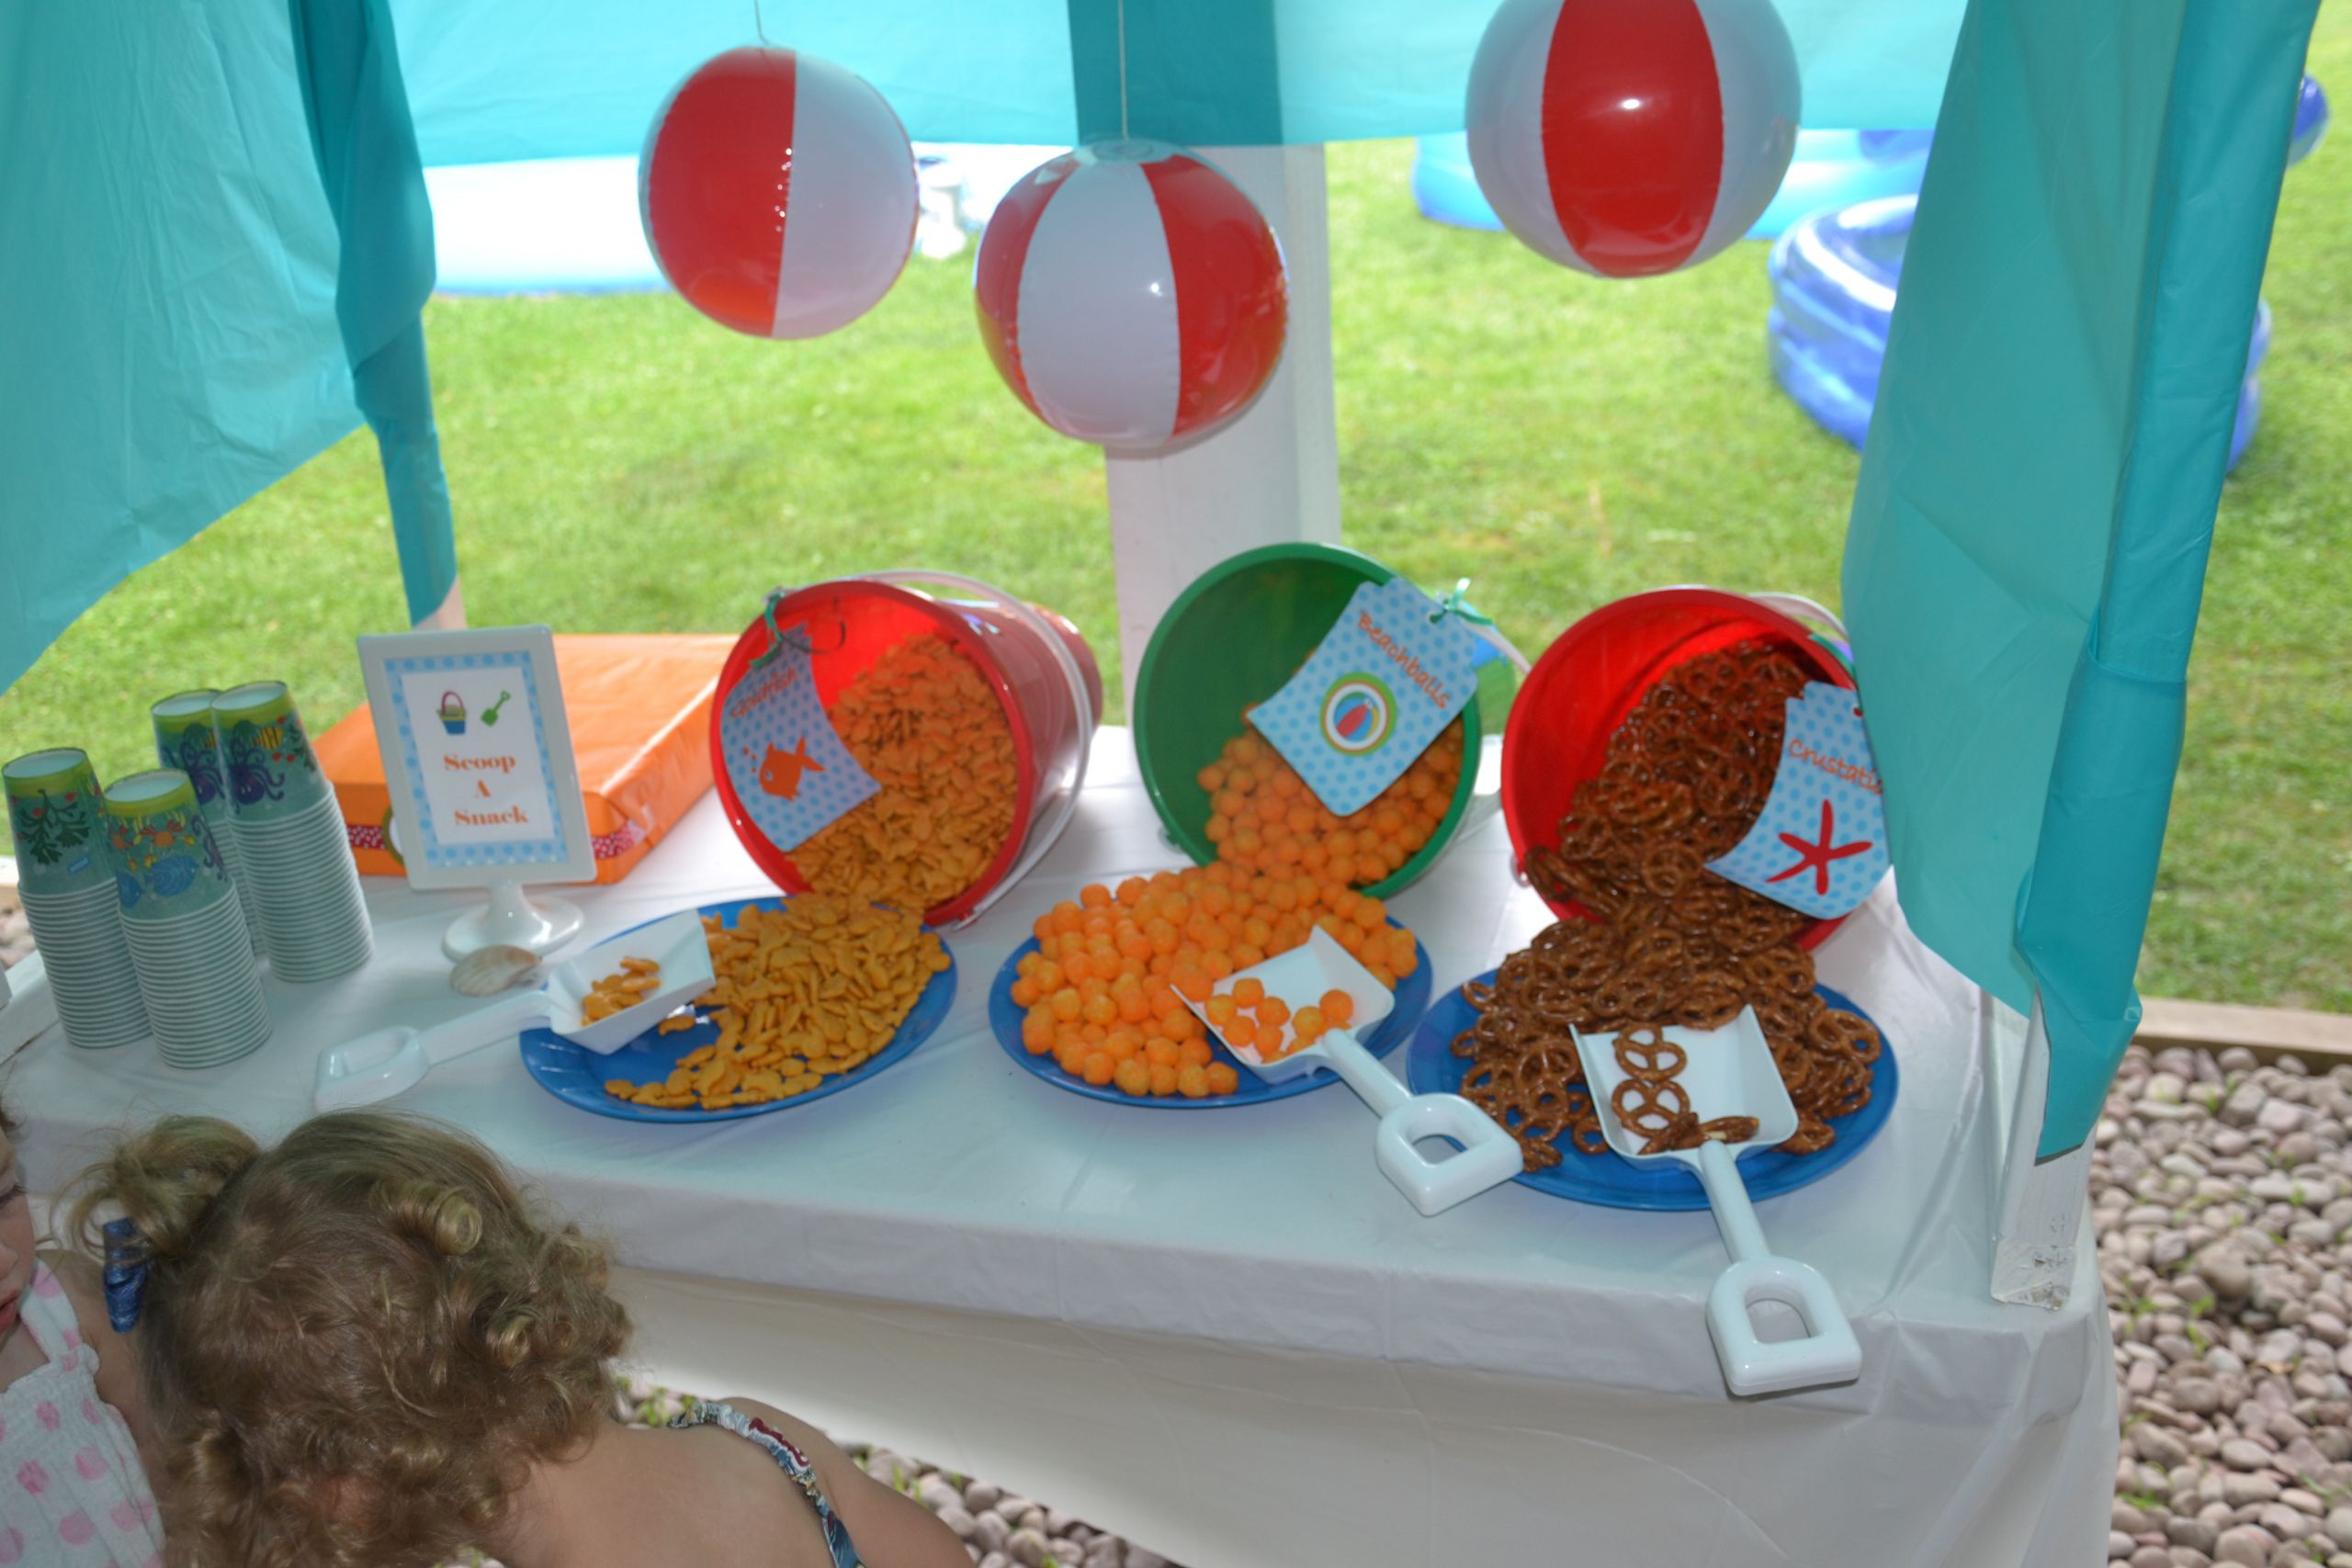 Beach Party Food Ideas Birthday
 Party on a Bud  Ideas for Serving Summer Snacks